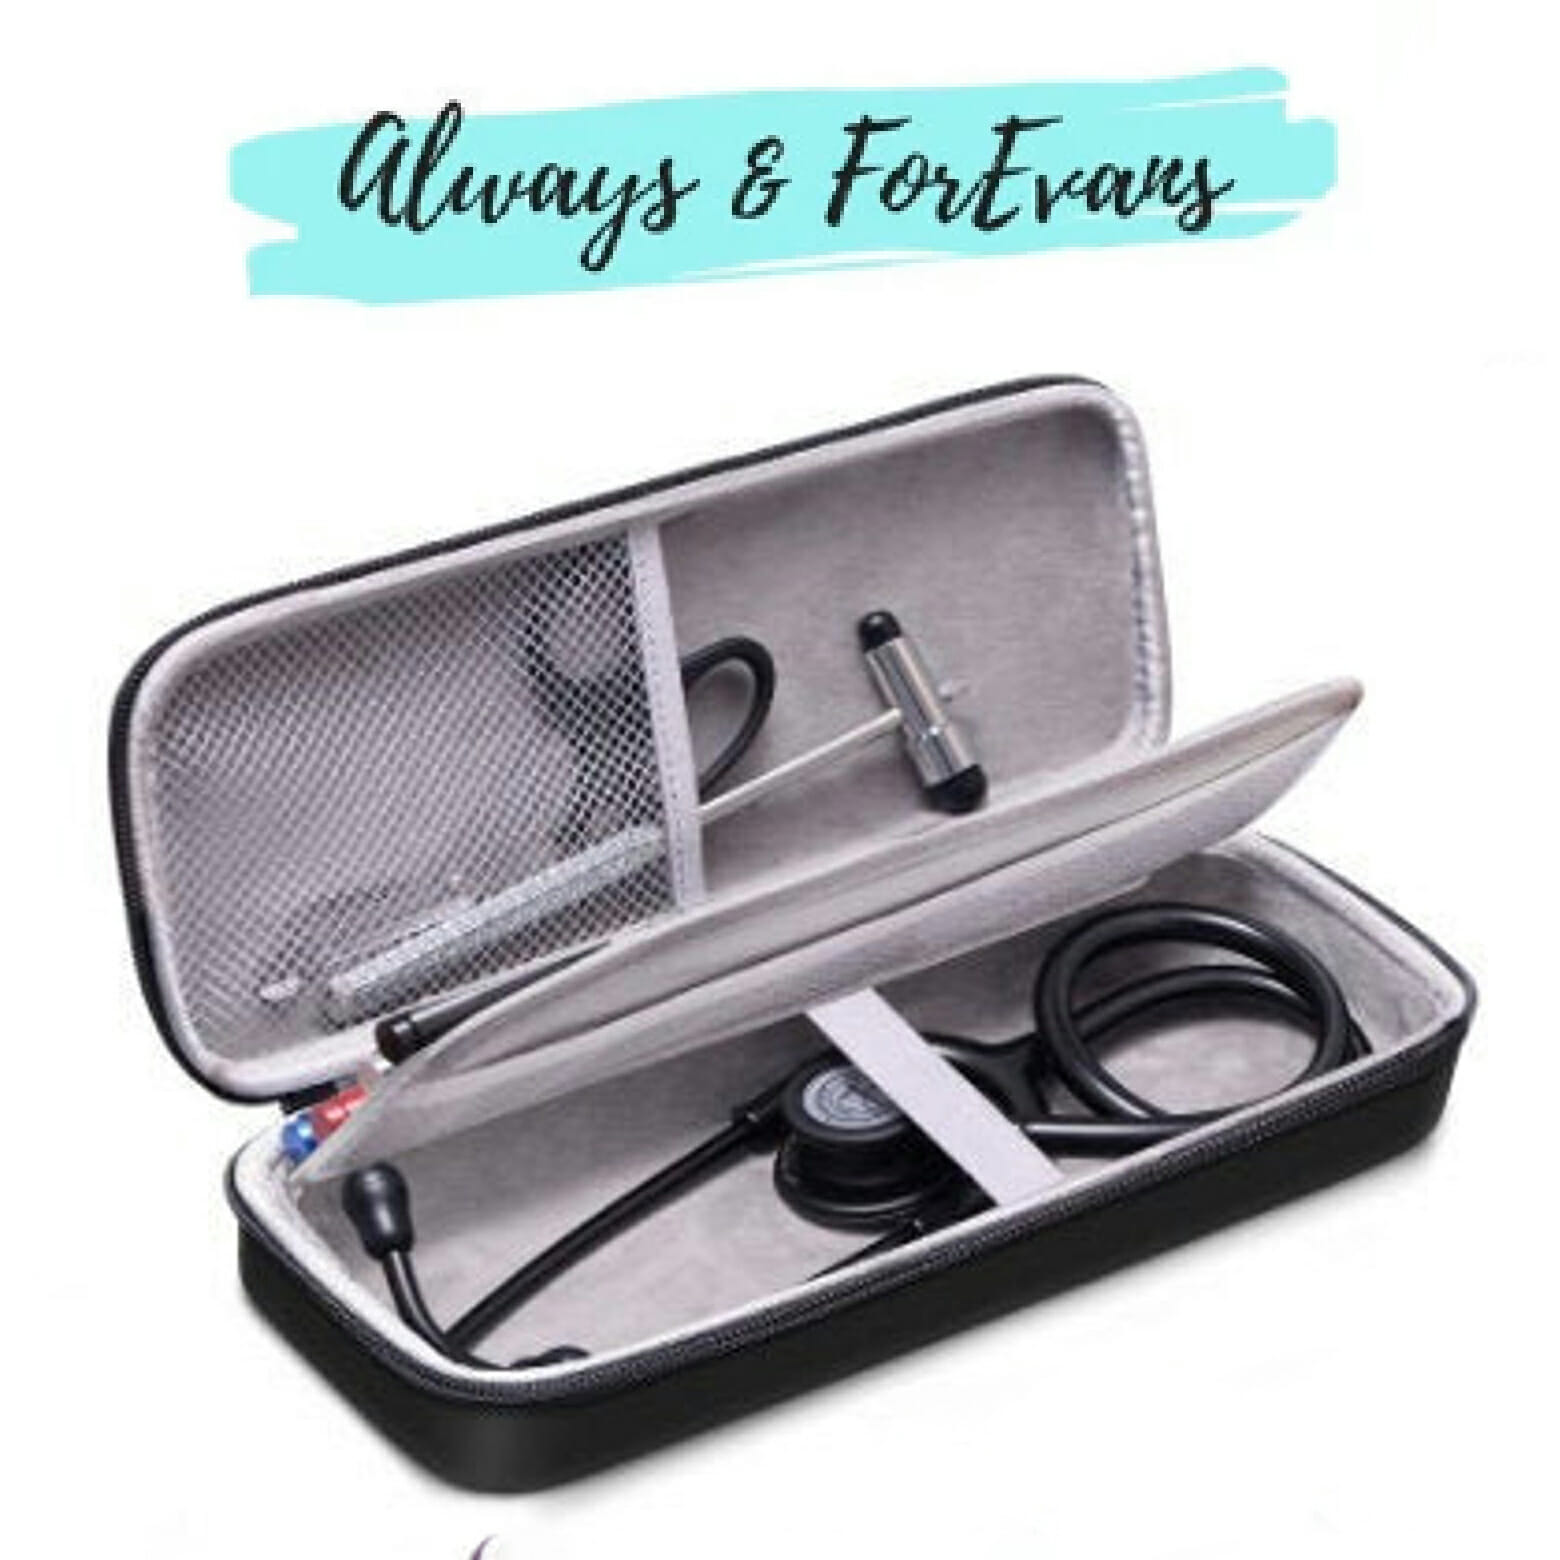 always and for evans personalized stethoscope case